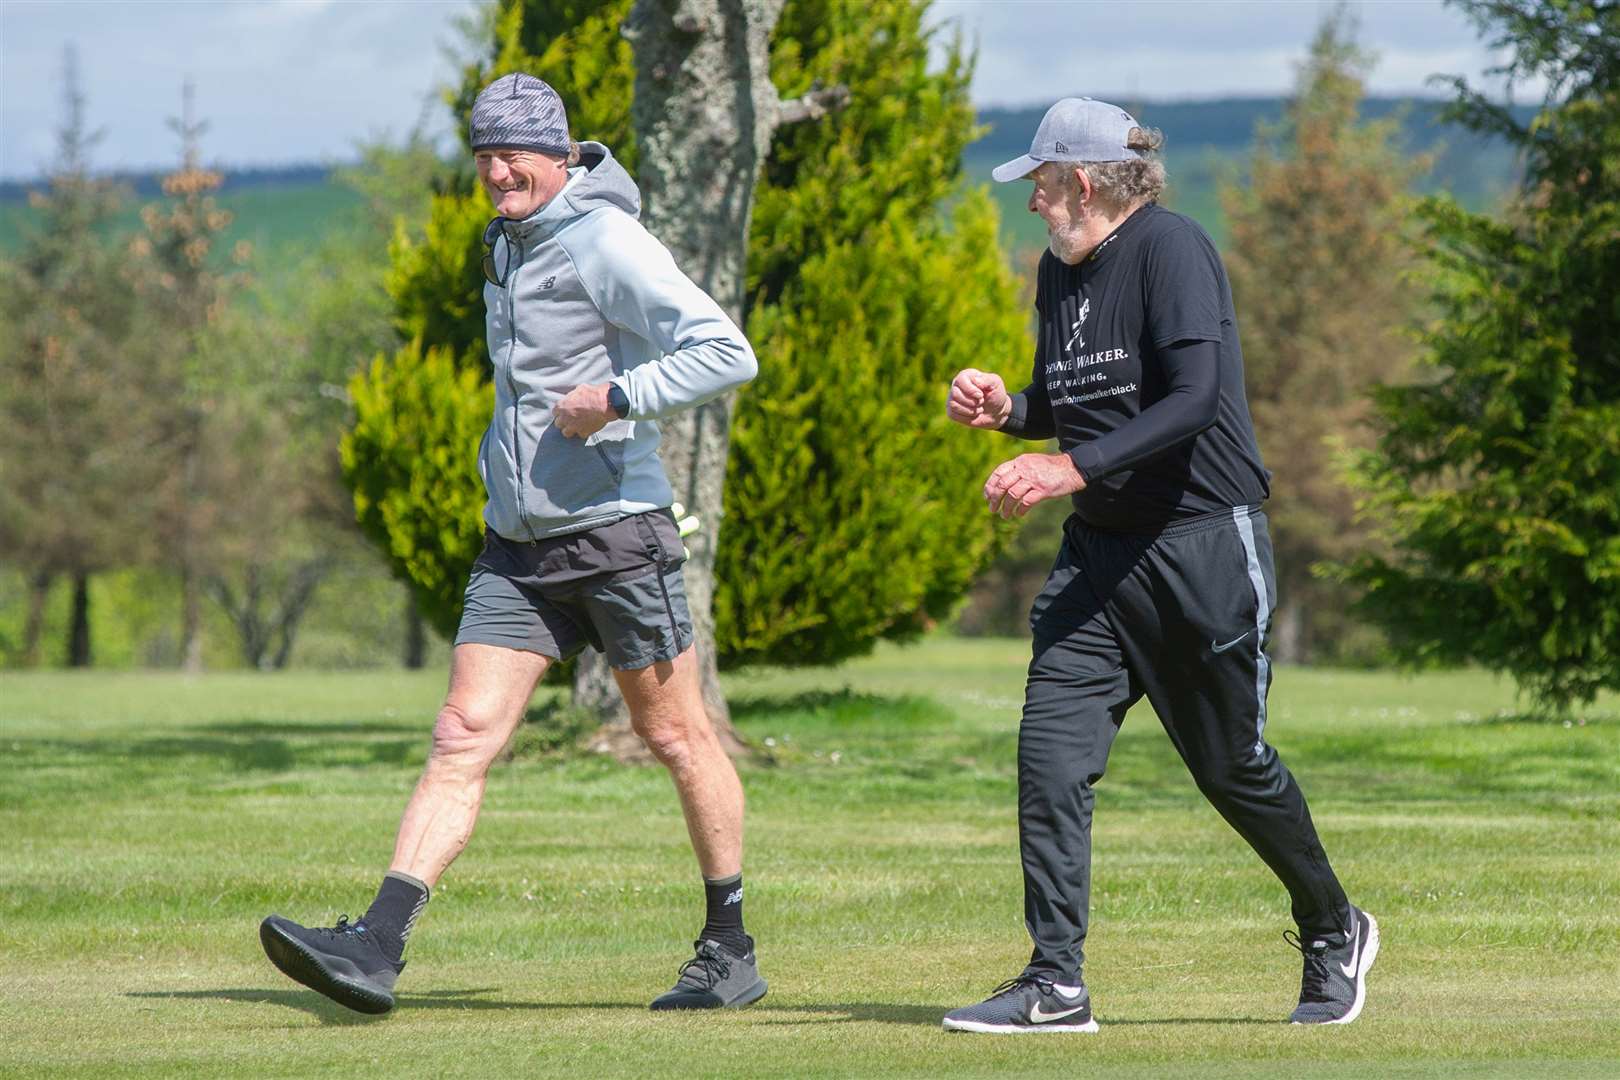 Former Scotland football captain Colin Hendry joins Eric Sharp for a couple of laps. Picture: Daniel Forsyth